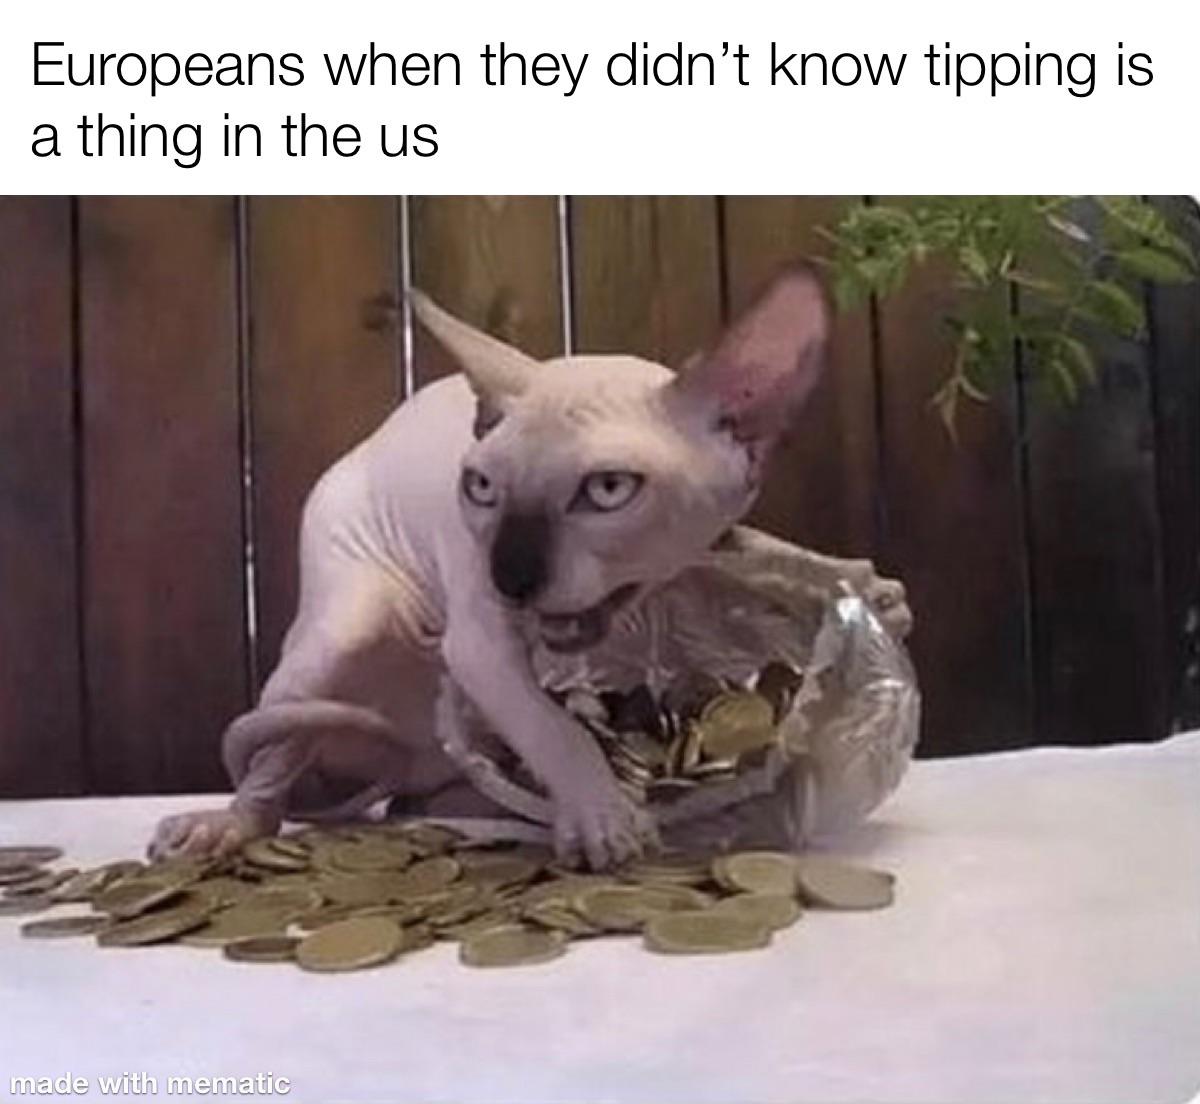 my precious cat meme - Europeans when they didn't know tipping is a thing in the us made with mematic